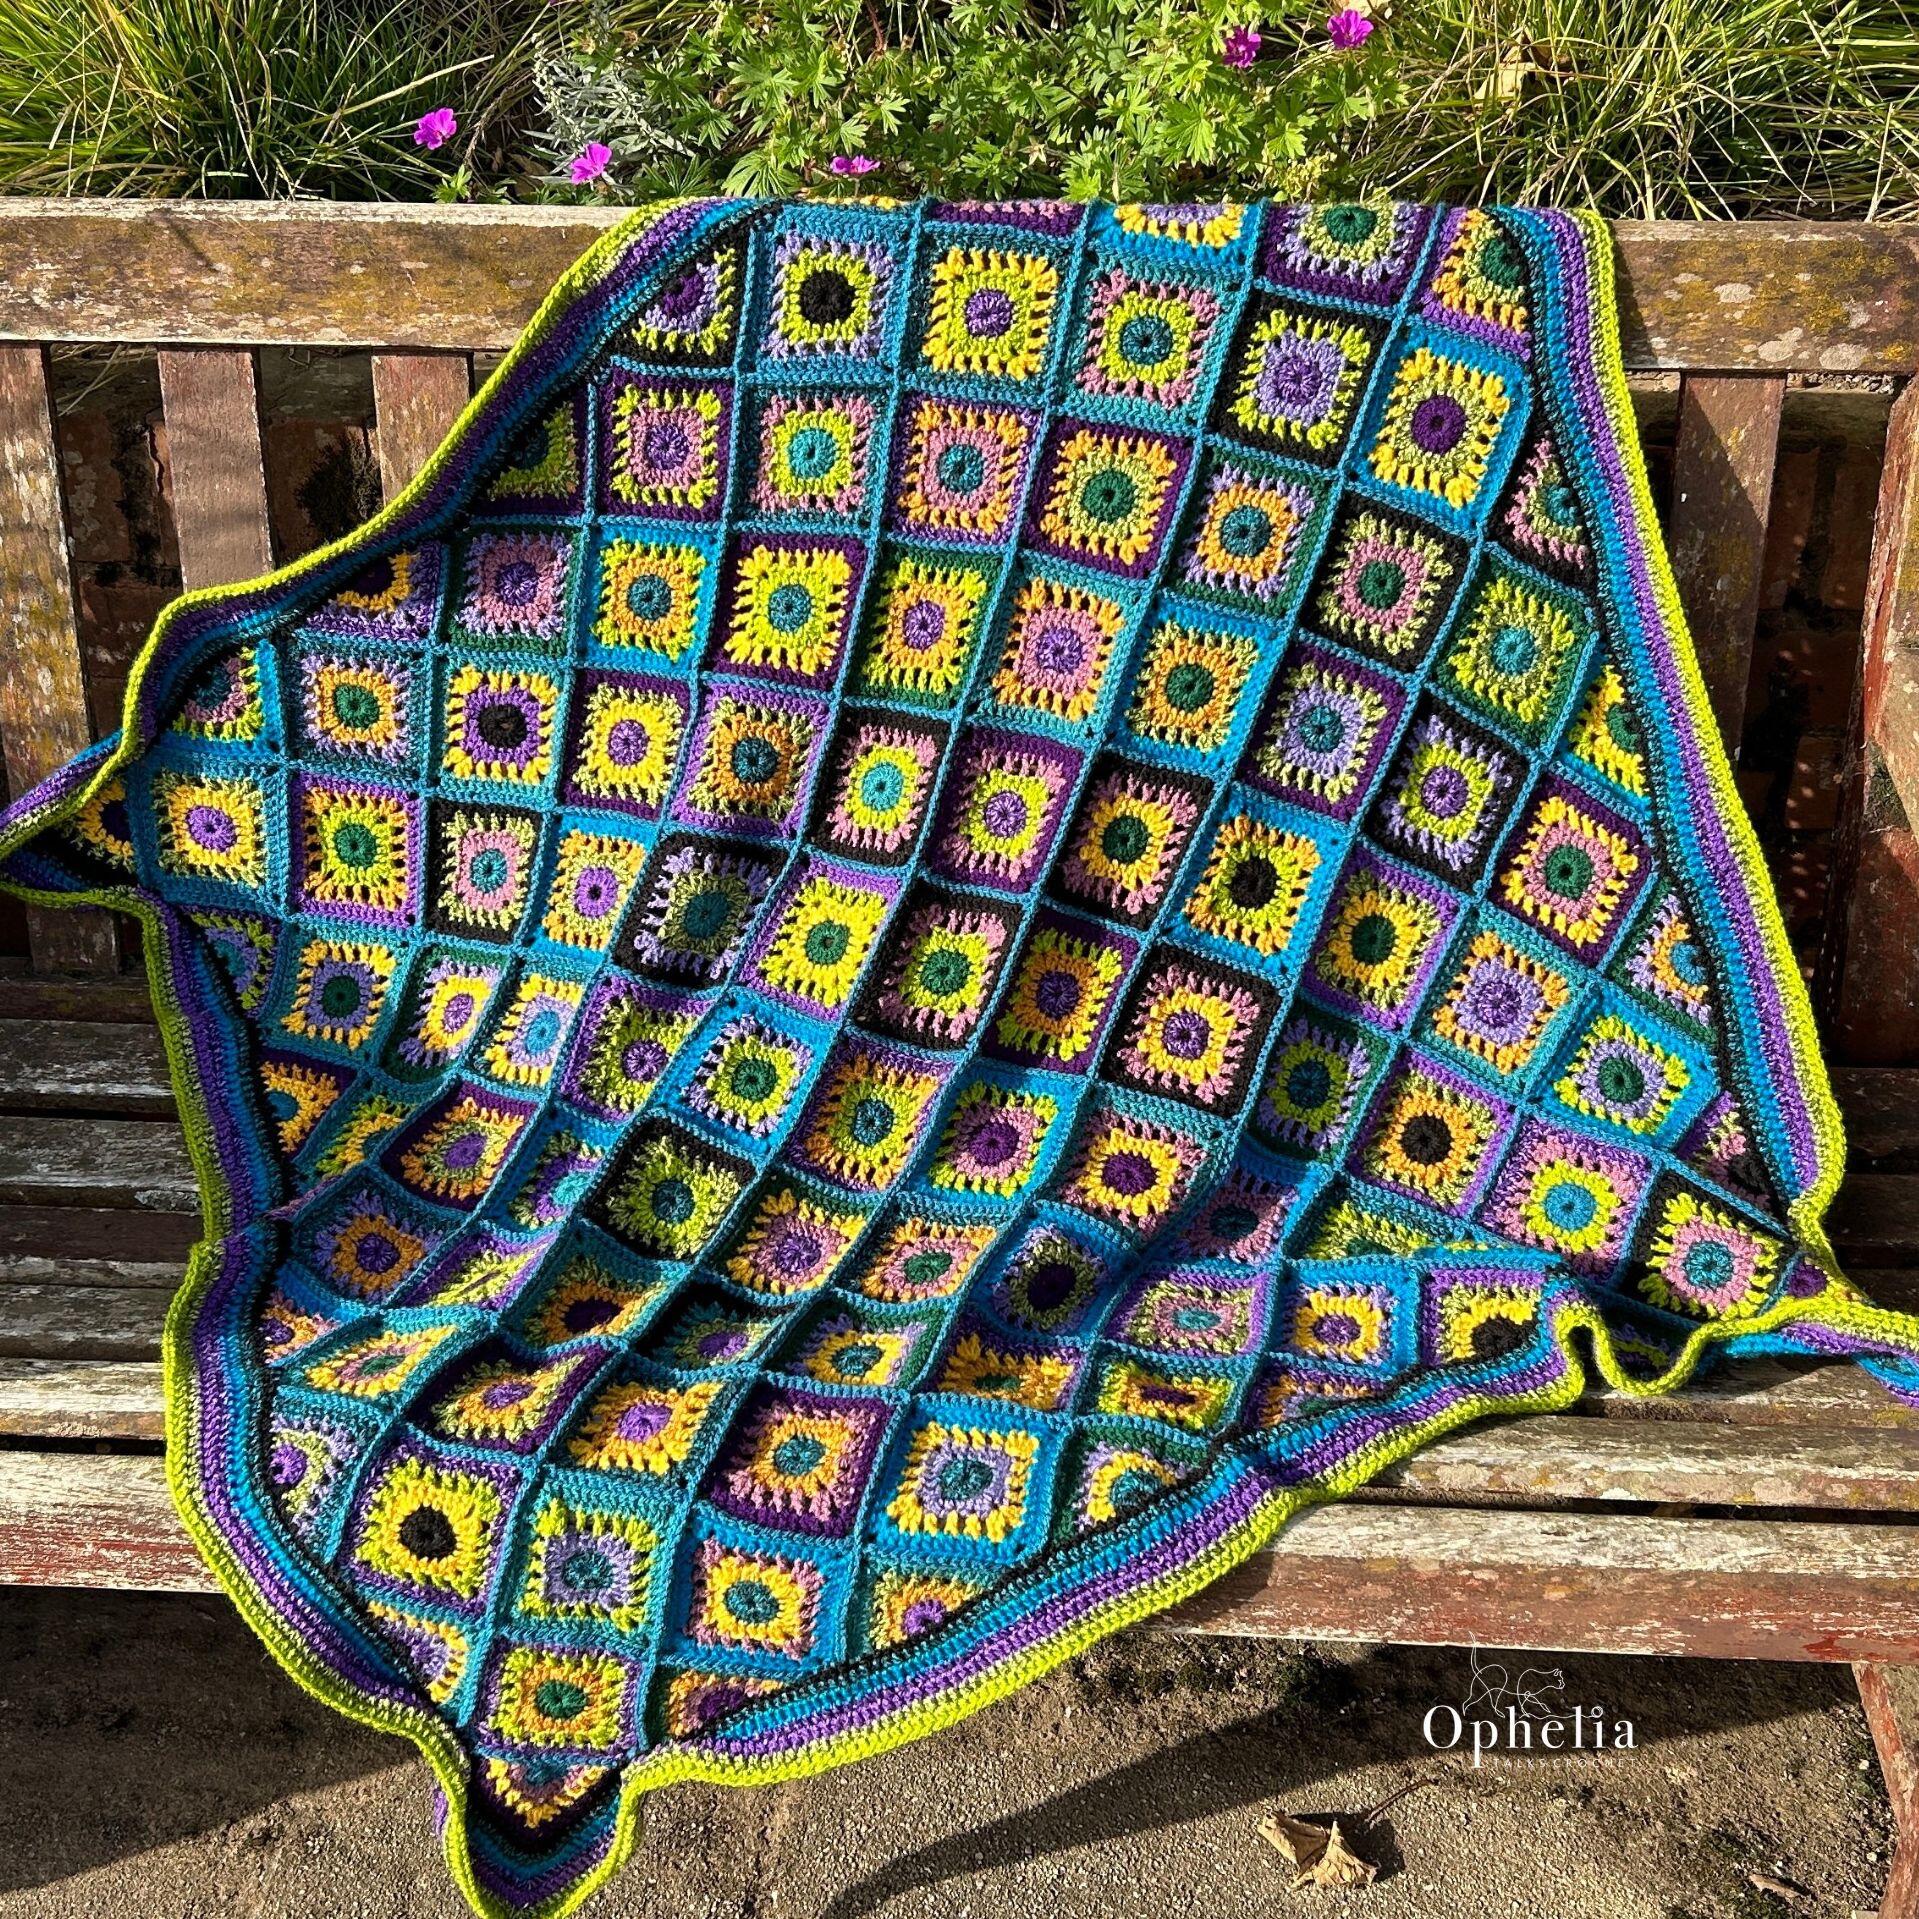 Peacock blanket on the bench